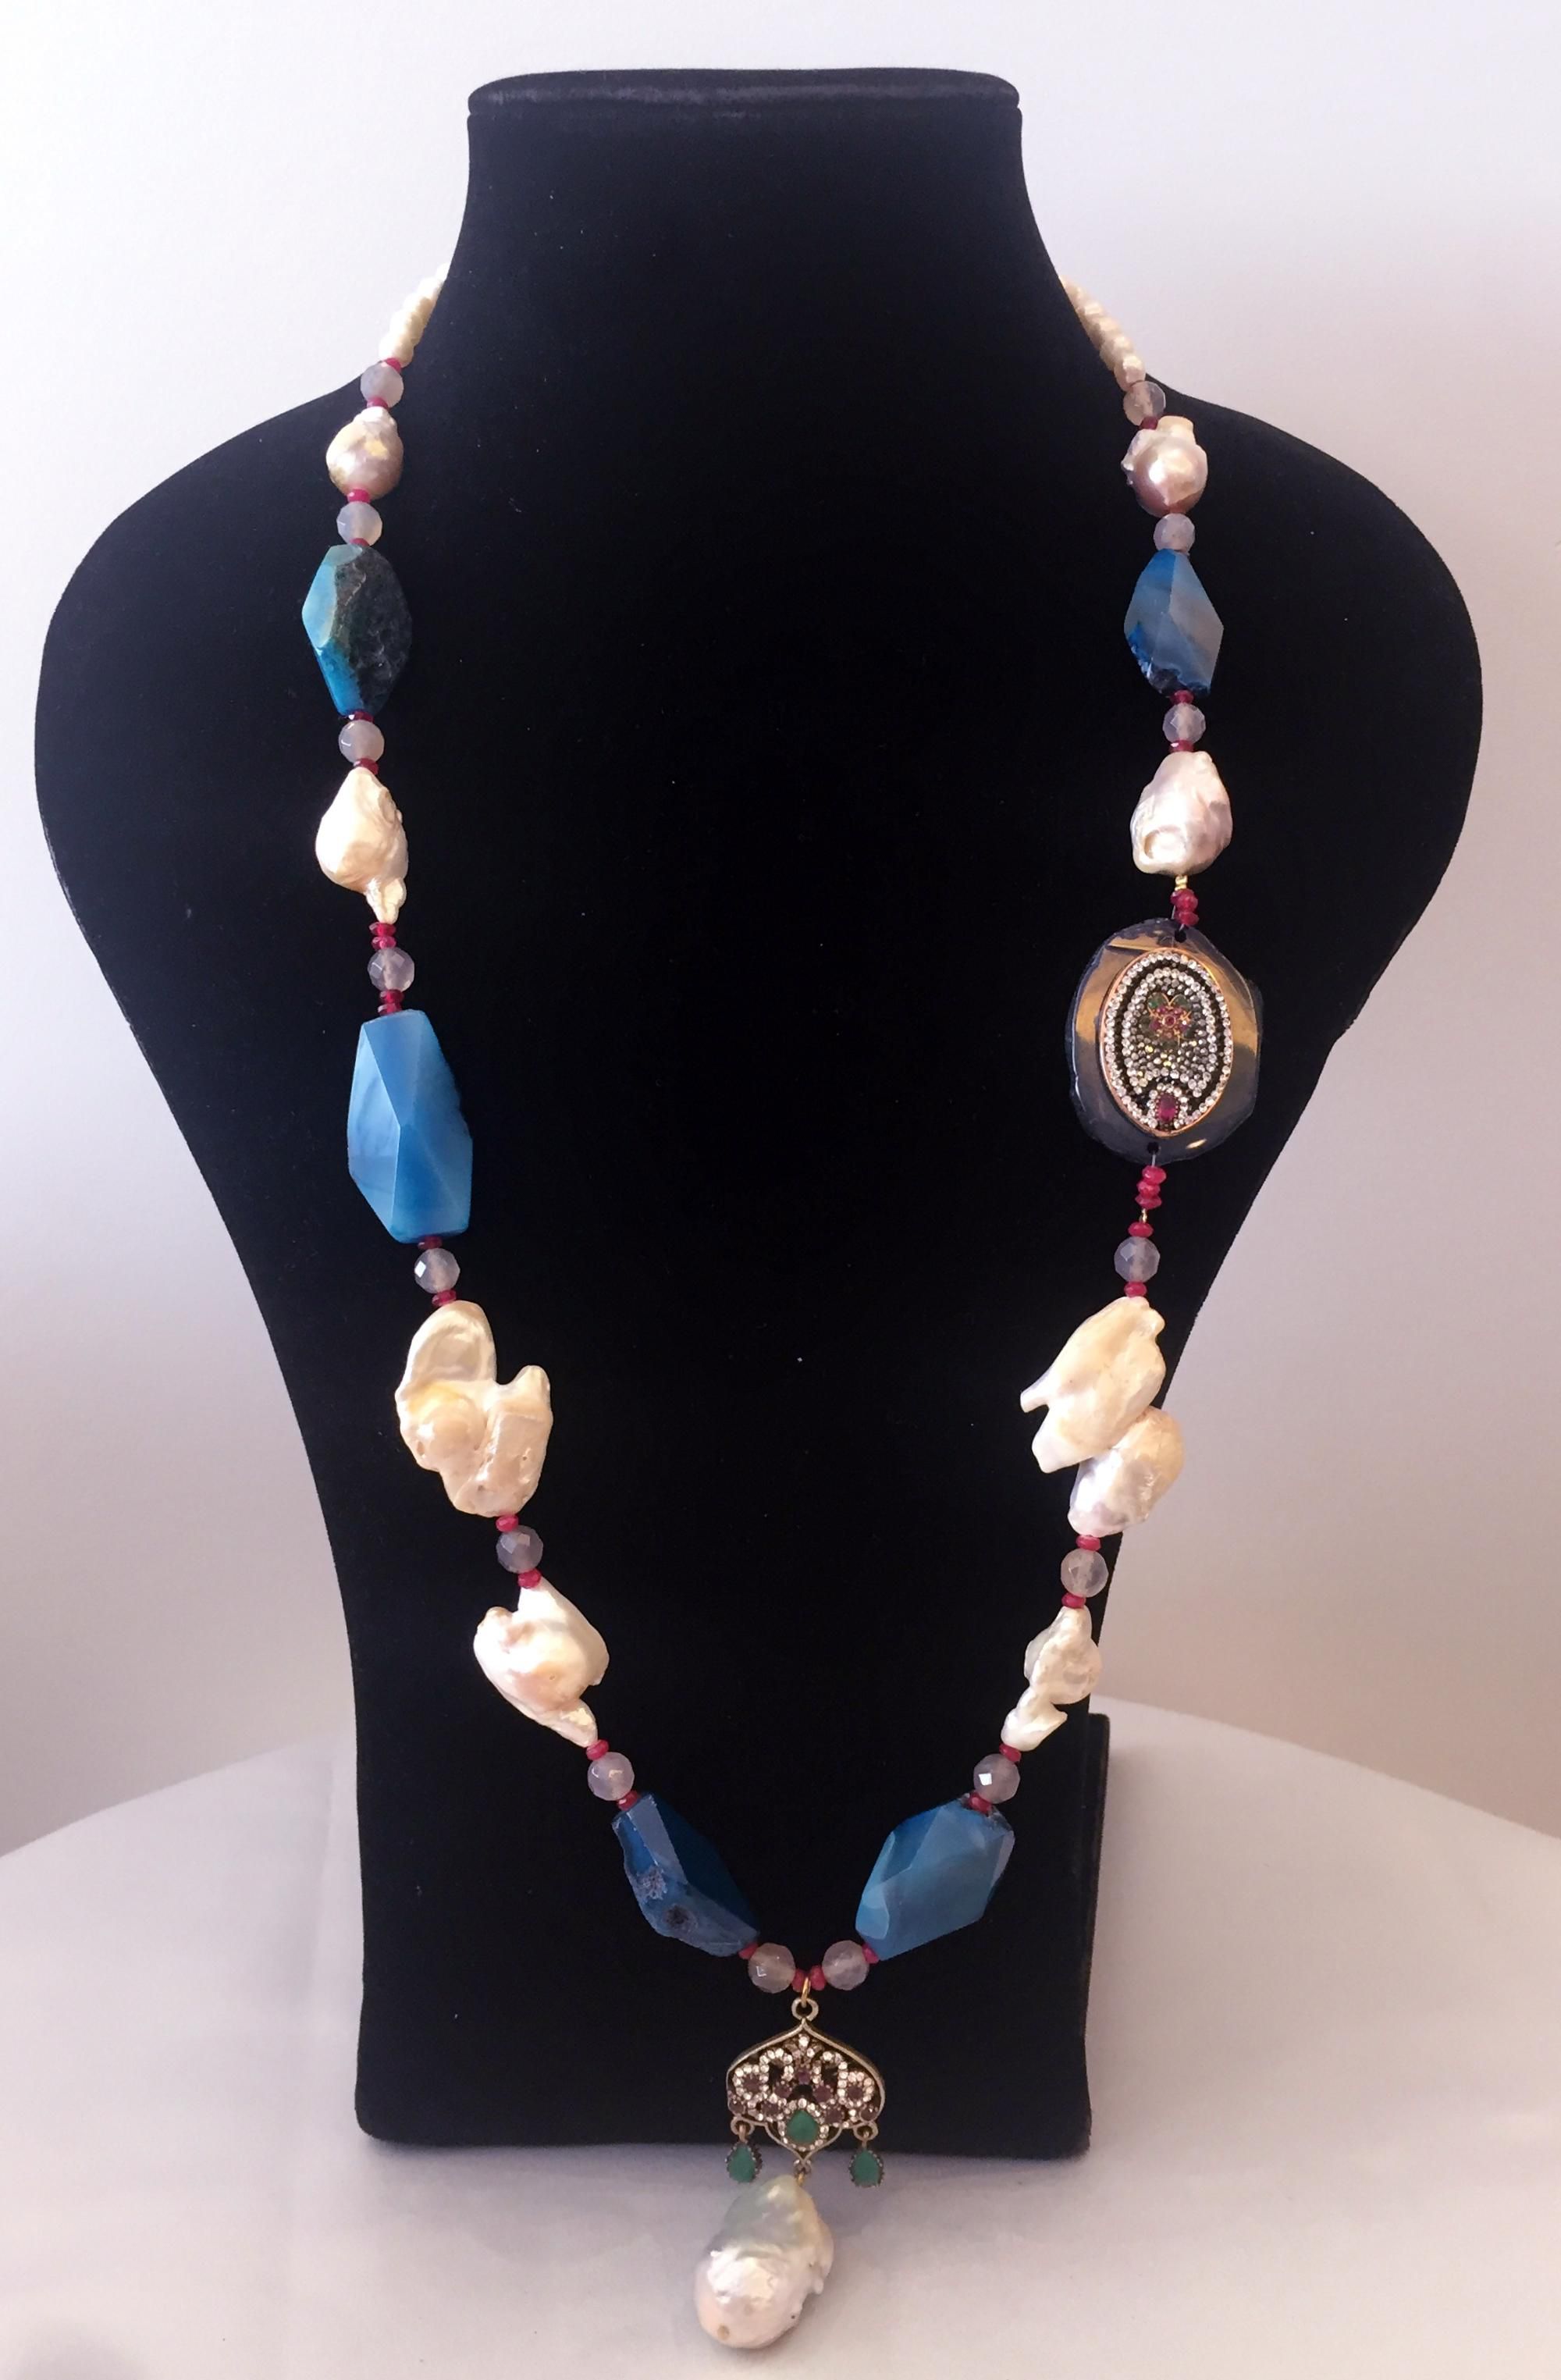 Pearl Chic Necklace with Barrock Pearls and Stones